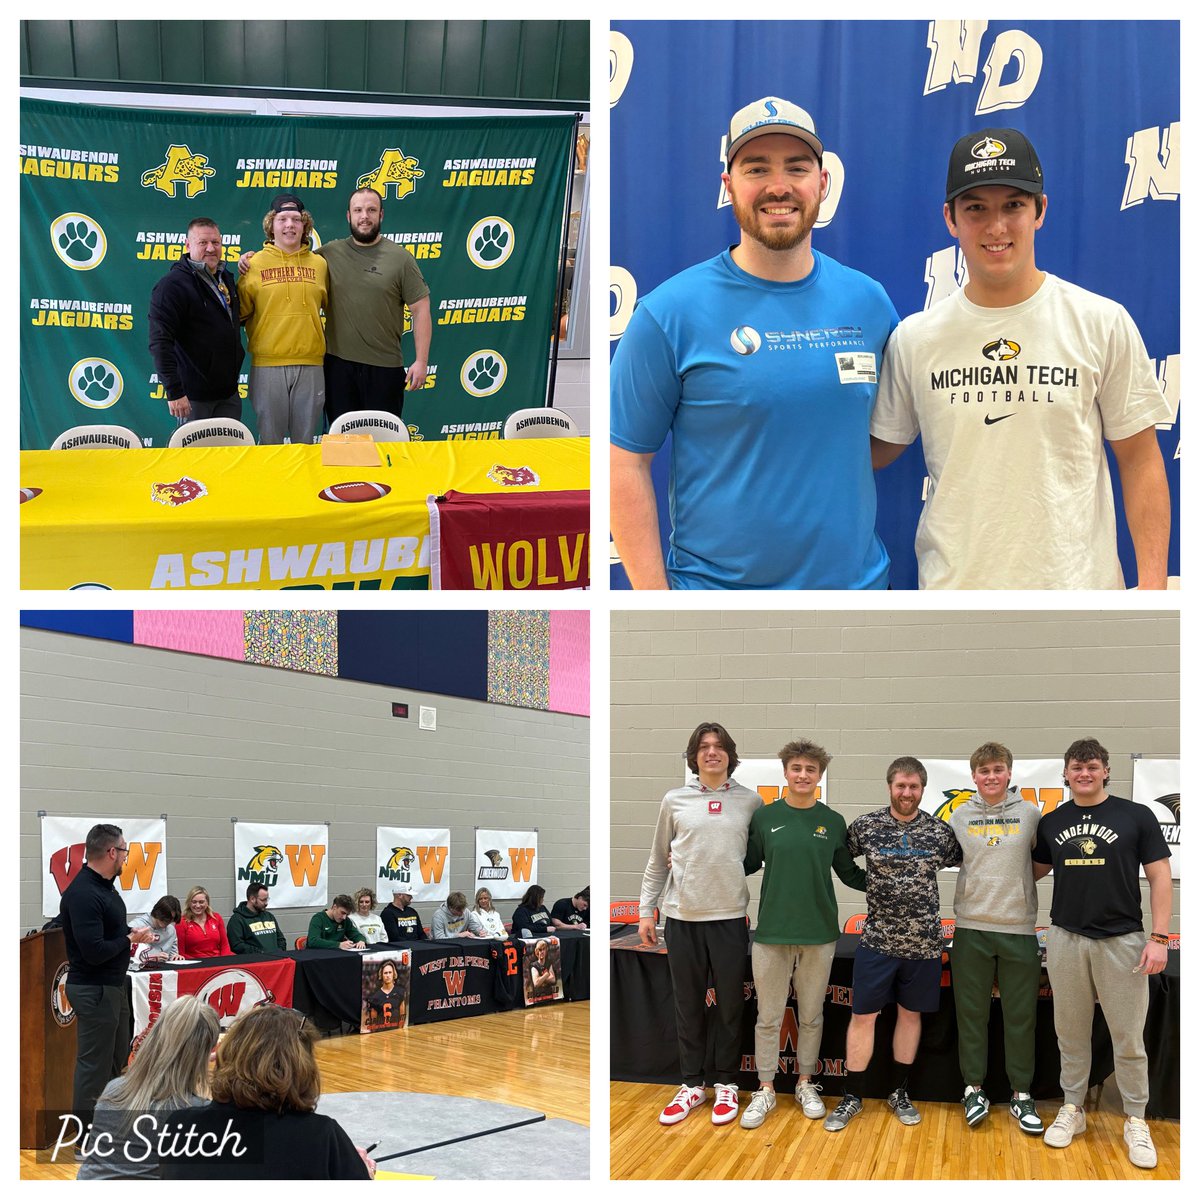 Always great to get out to signing days. Congrats everyone.